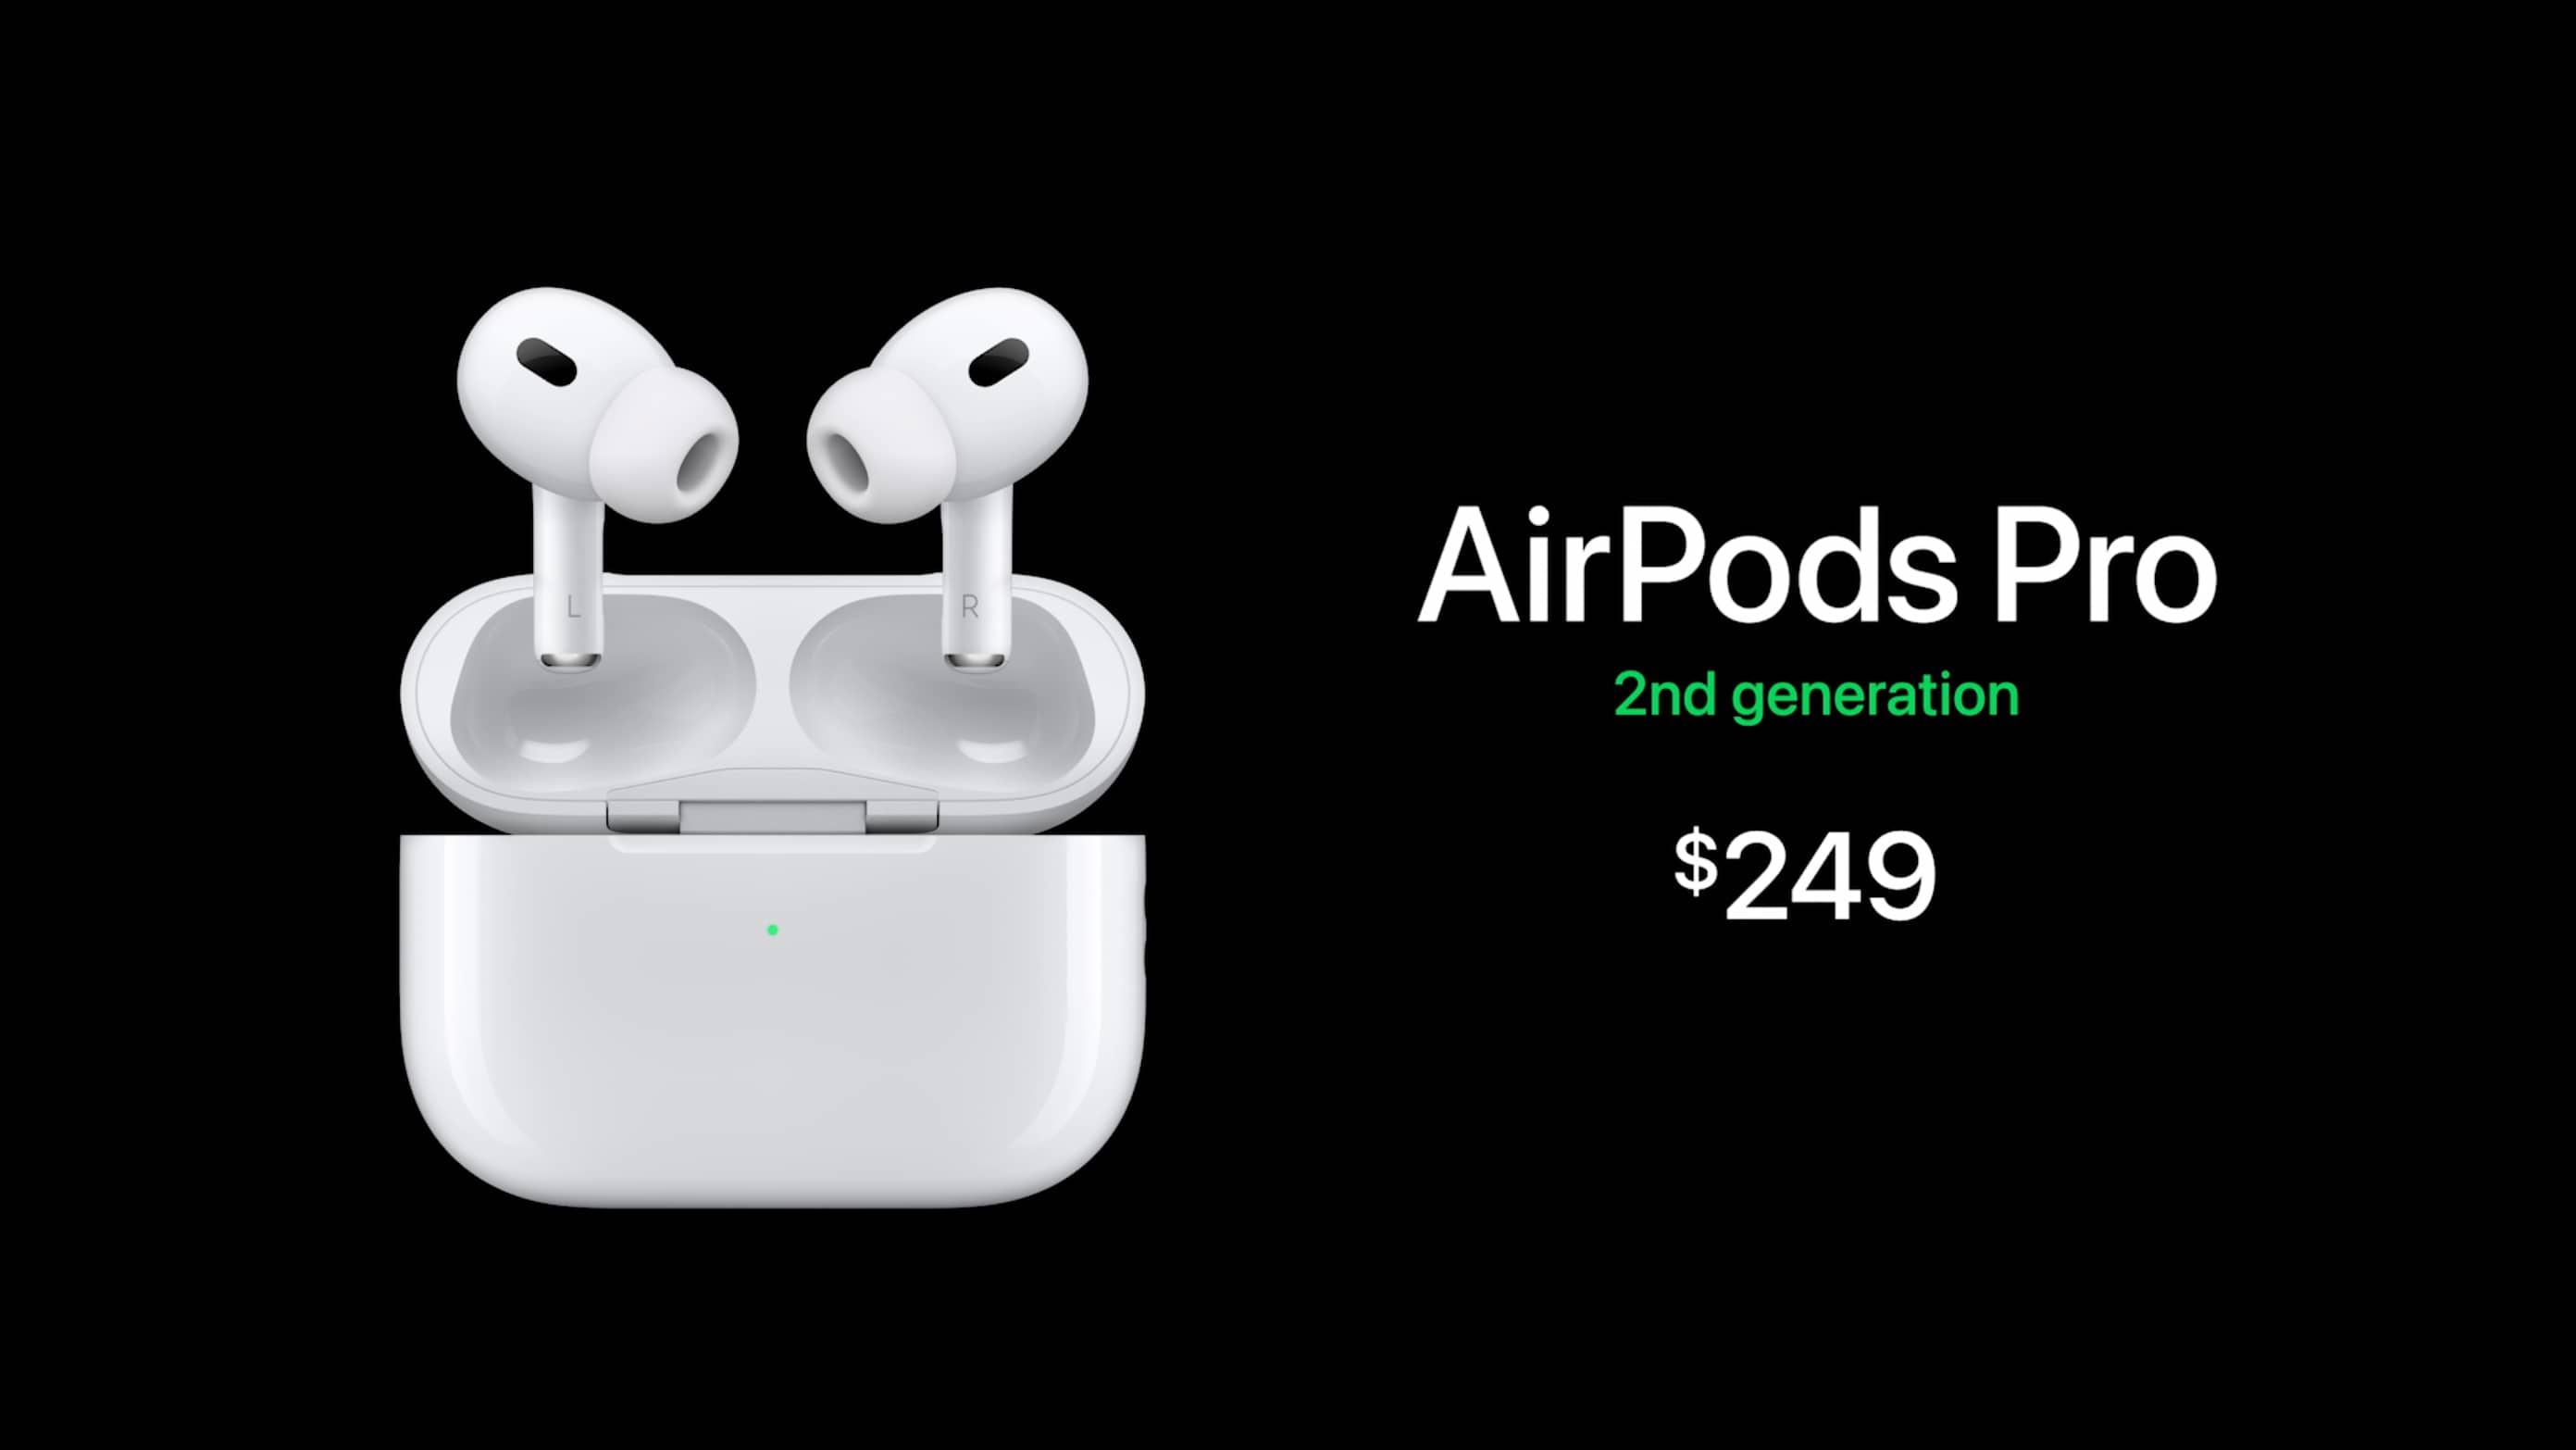 Apple image showcasing the second-generation AirPods Pro and their $249 price